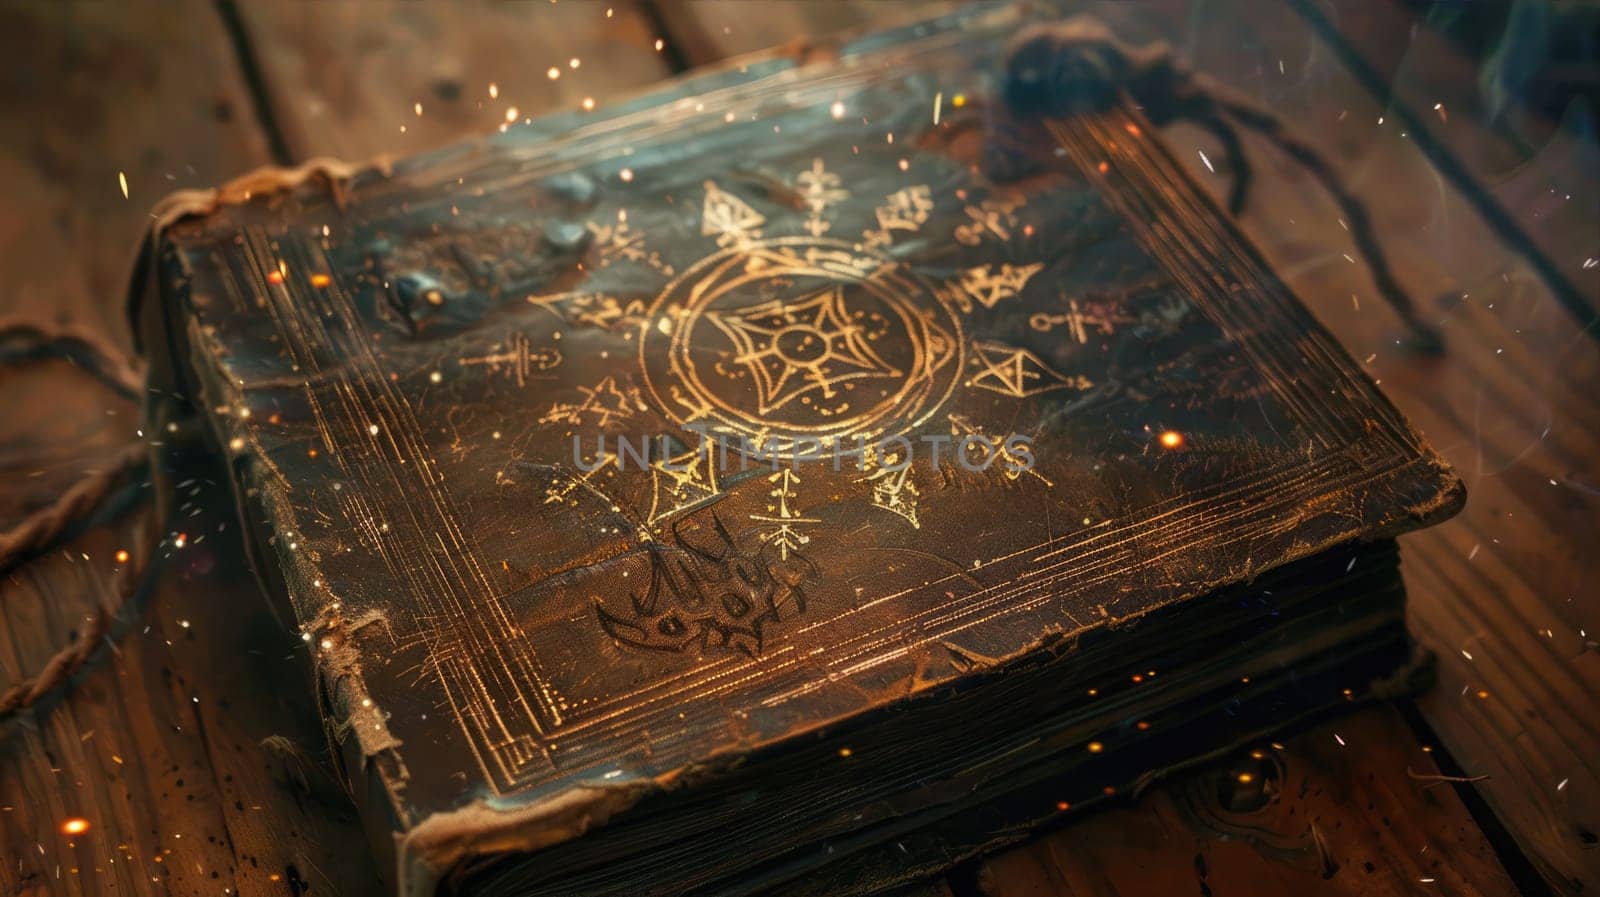 Grimoire arcana for enhancing magical abilities and skills by natali_brill